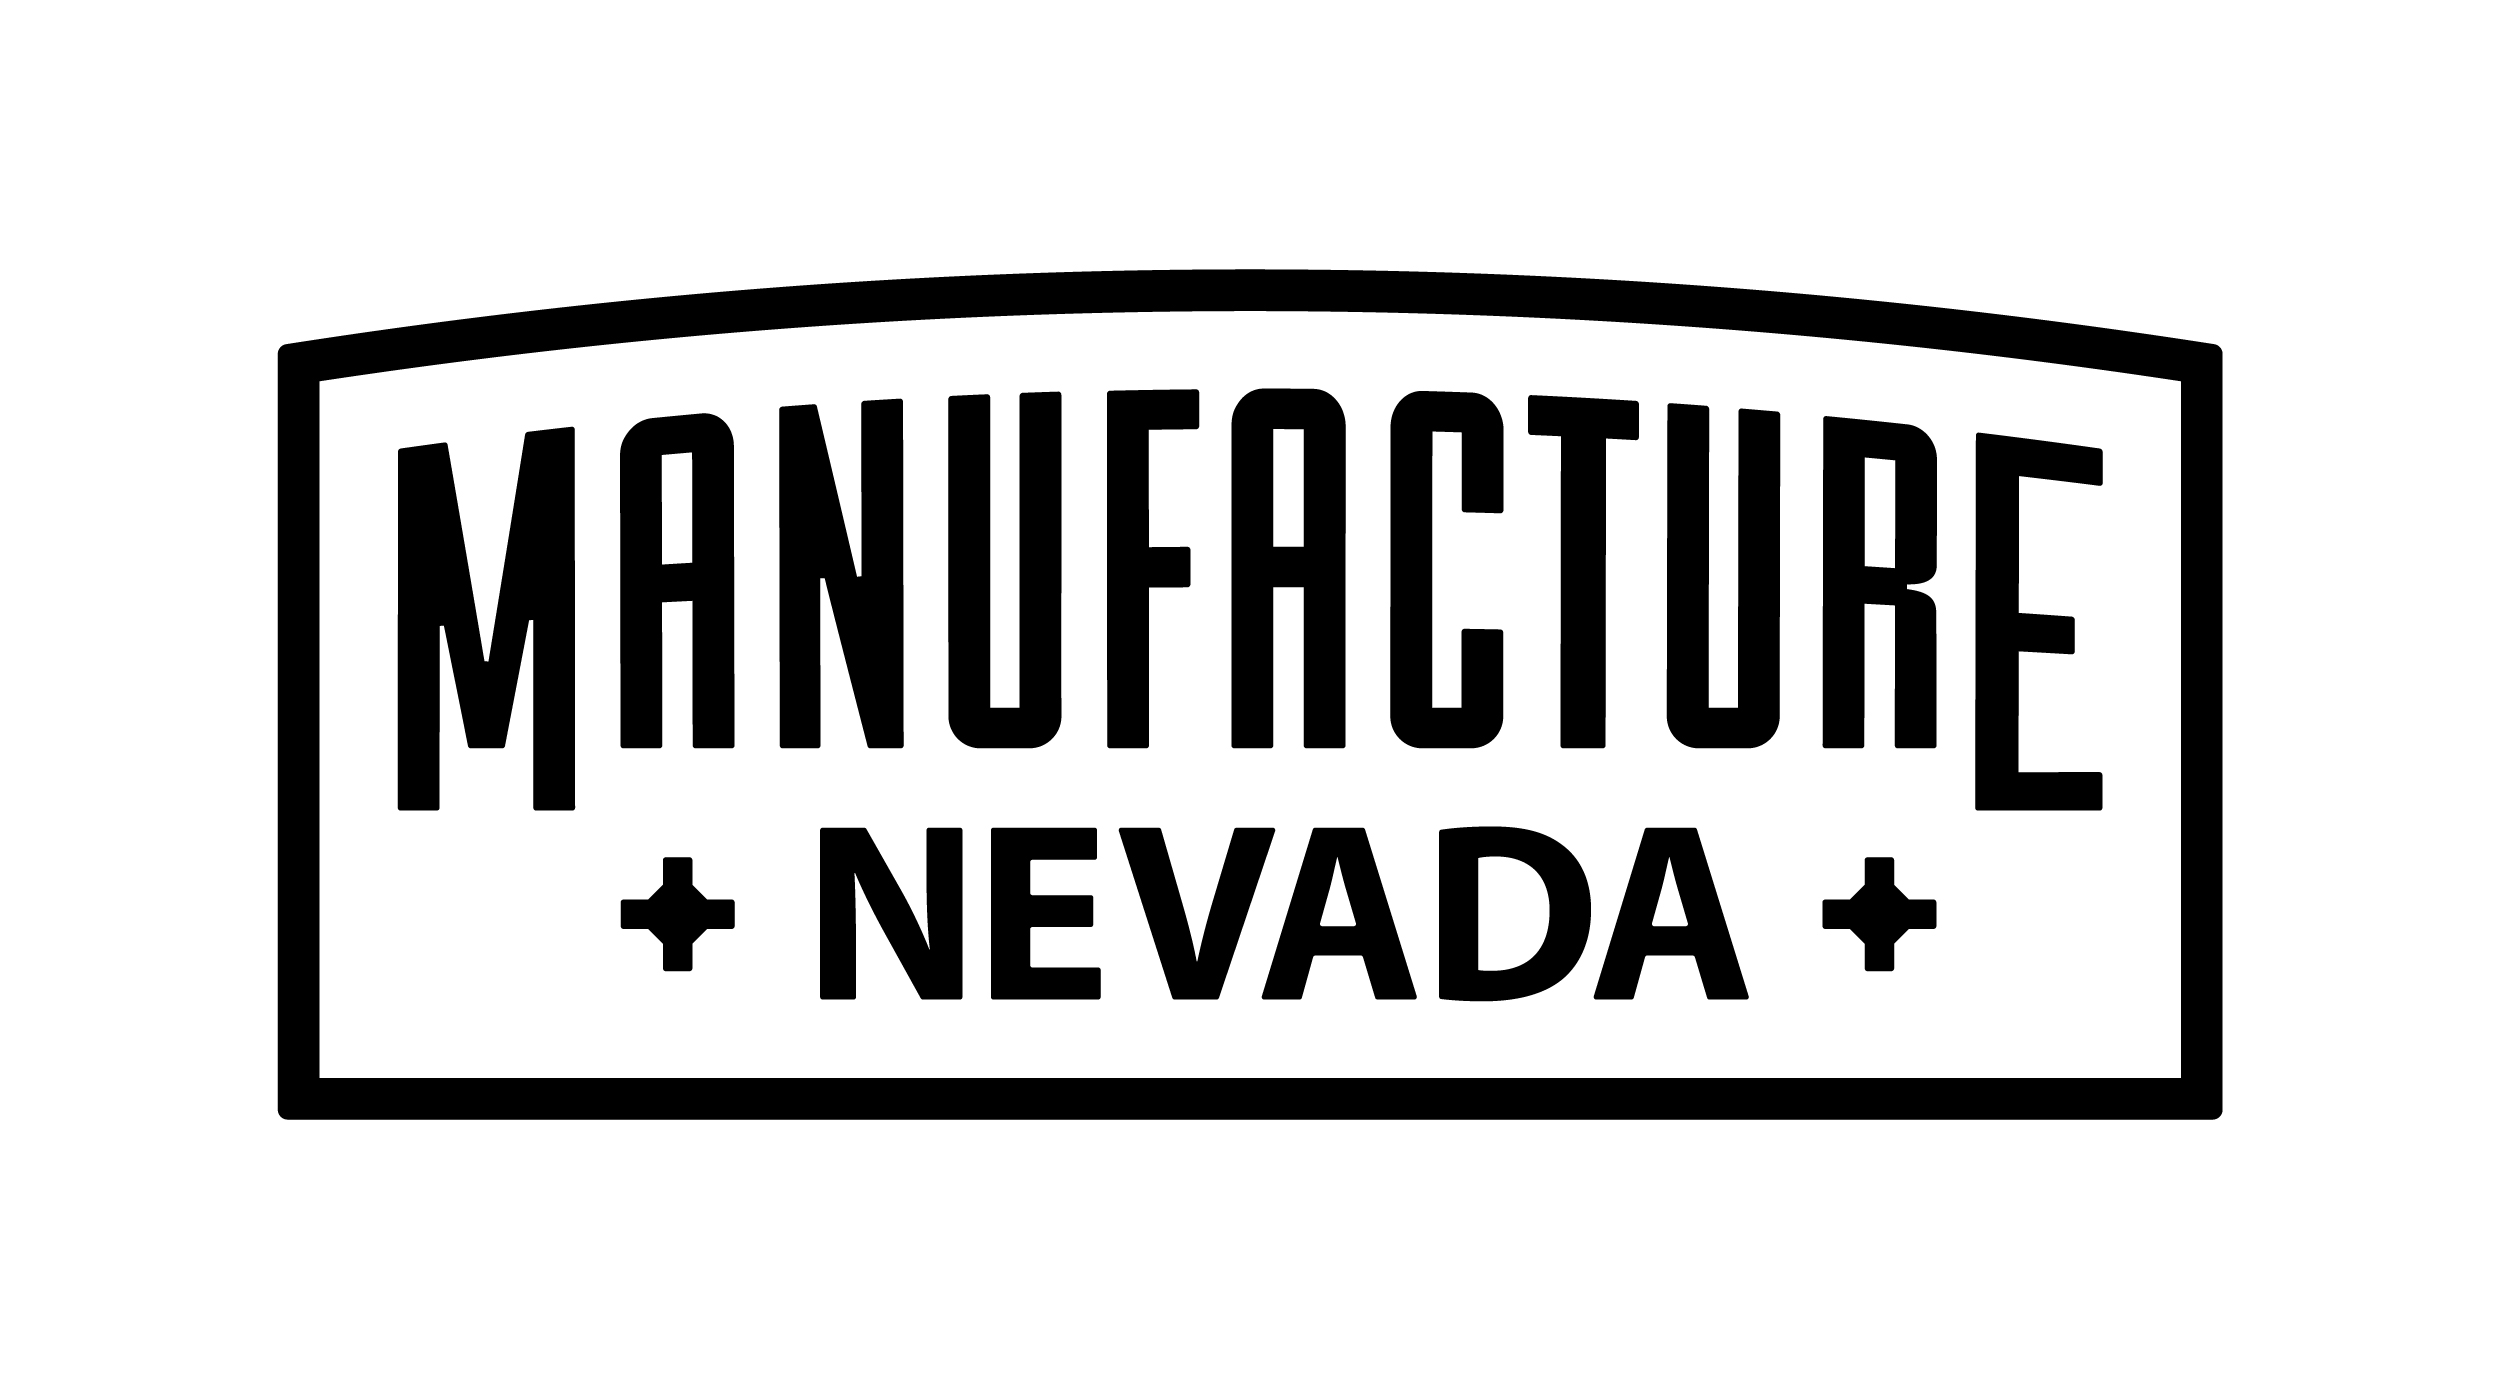 Logo for Manufacture Nevada - it features black text on a white background and simply states "Manufacture Nevada" with no images.